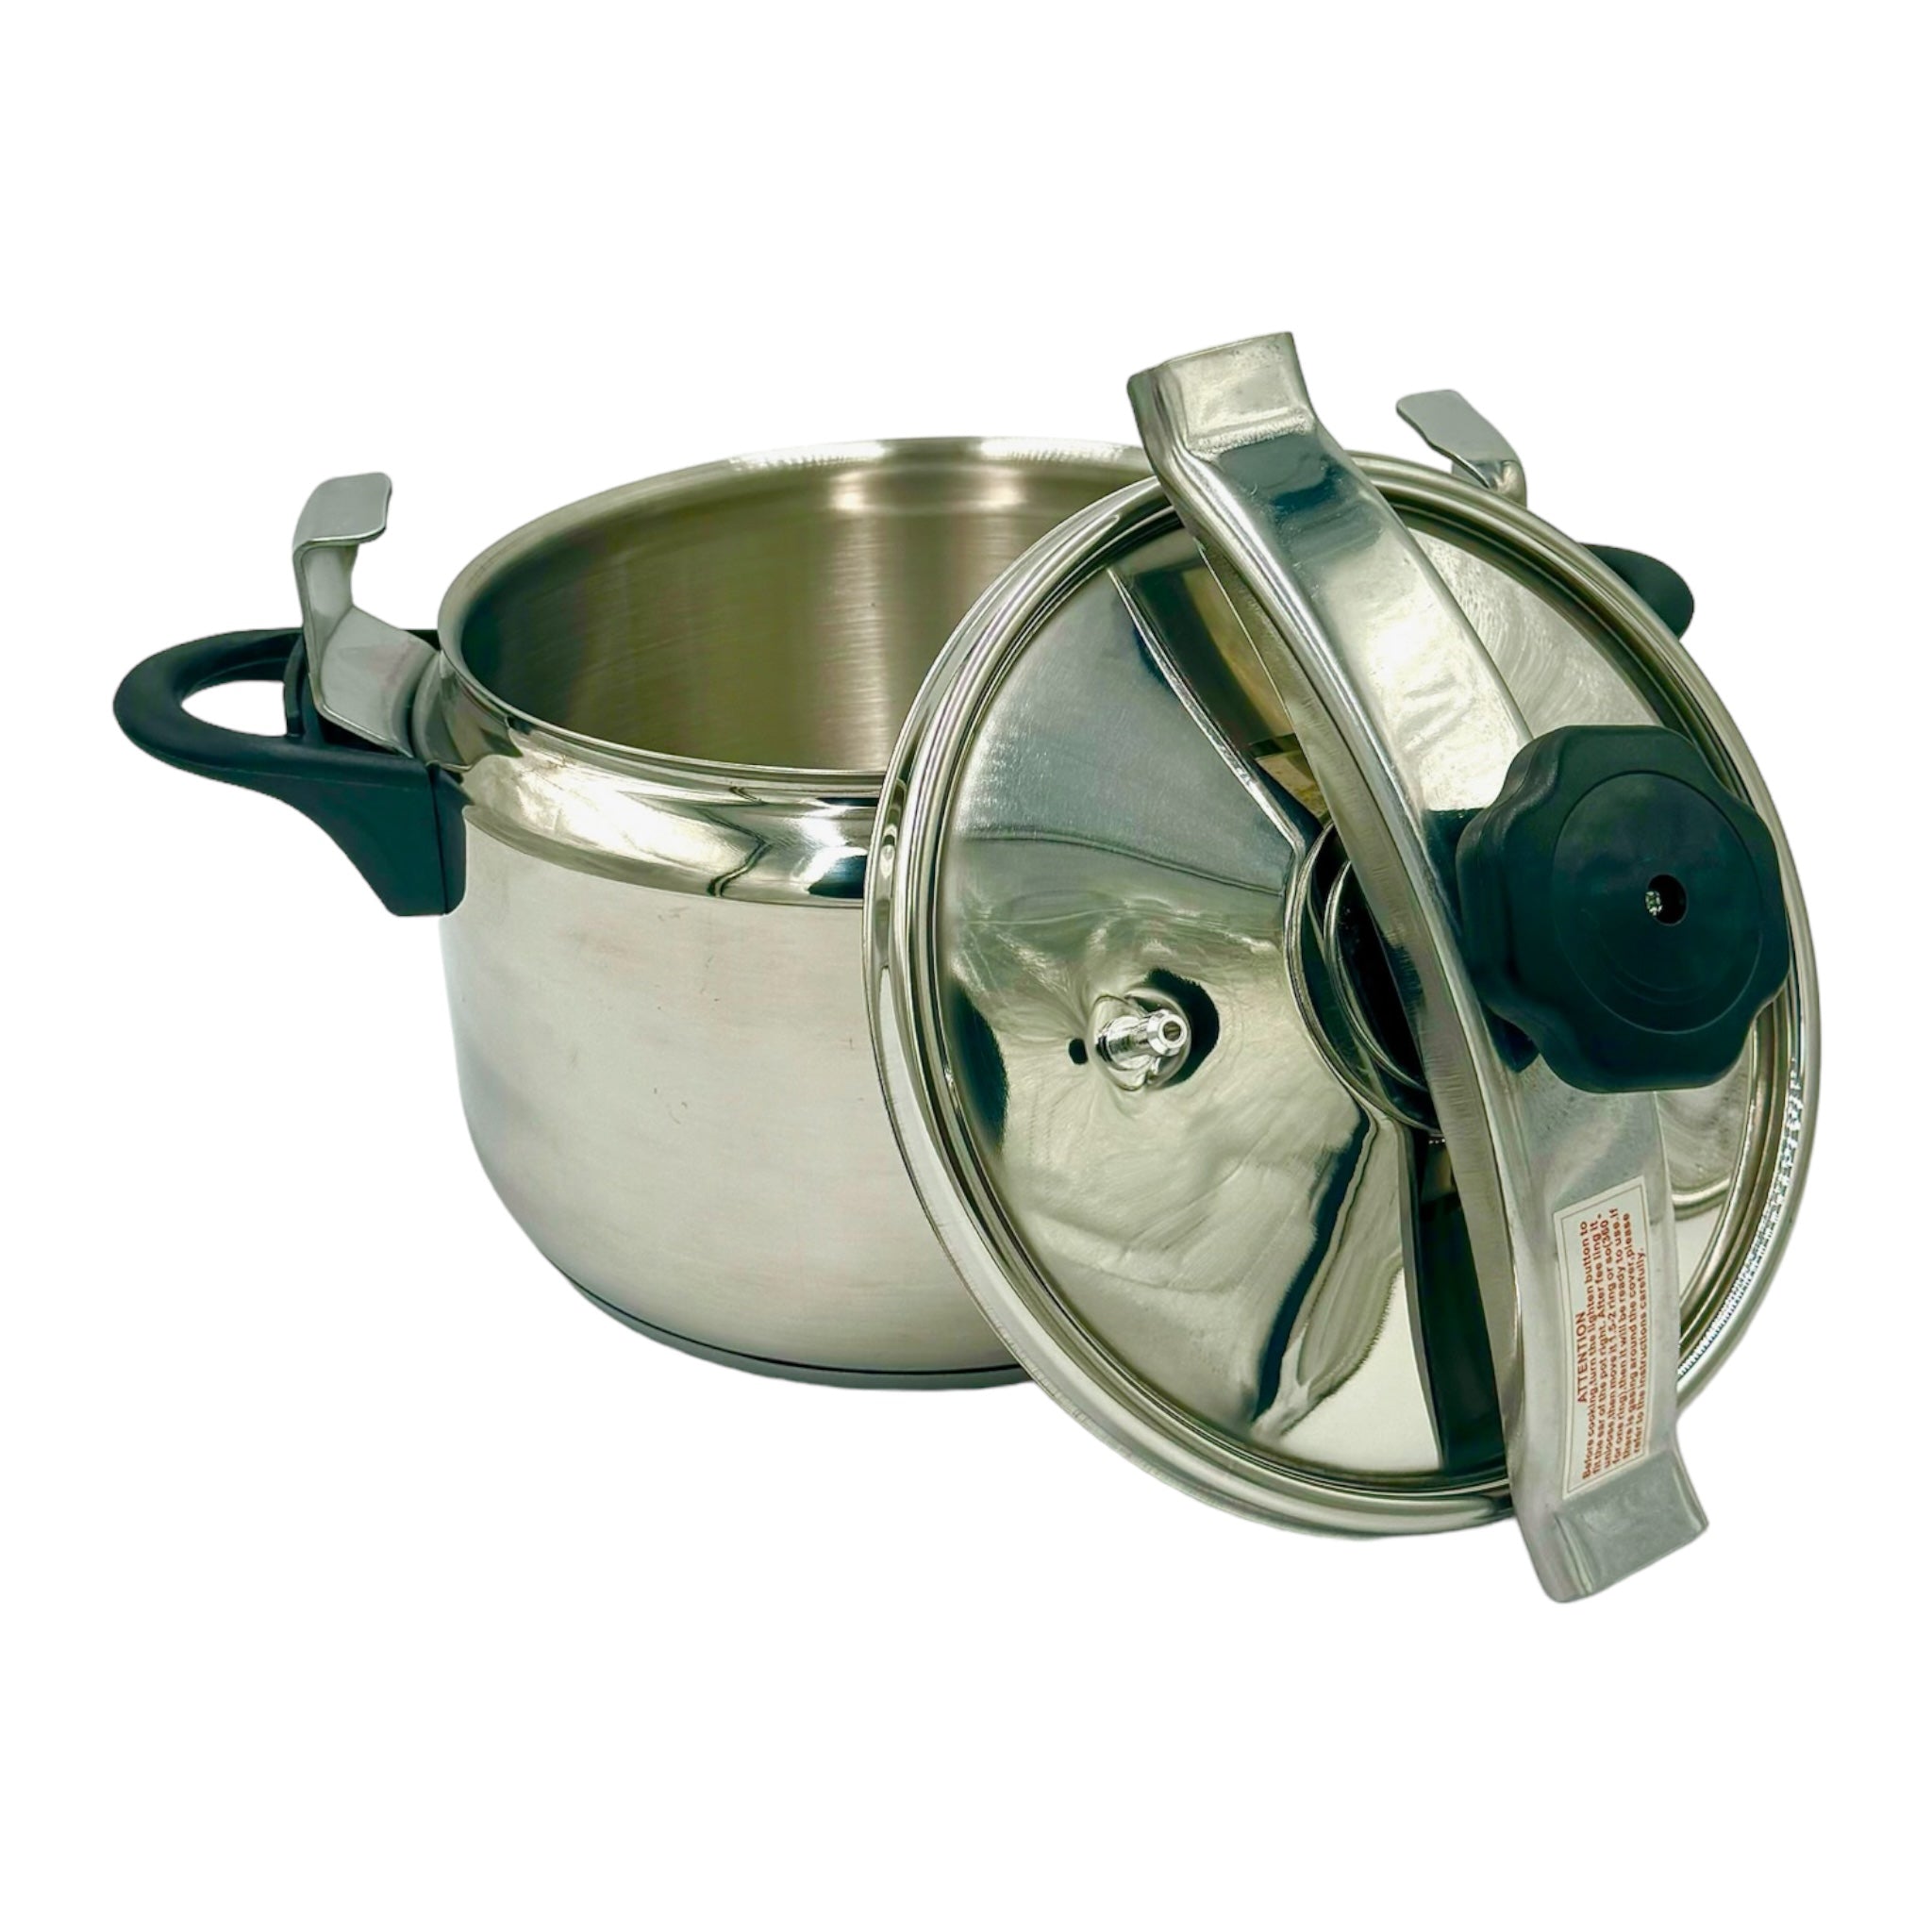 Stainless Steel Pressure Cooker 9L | Cocotte Minute by Mazyana